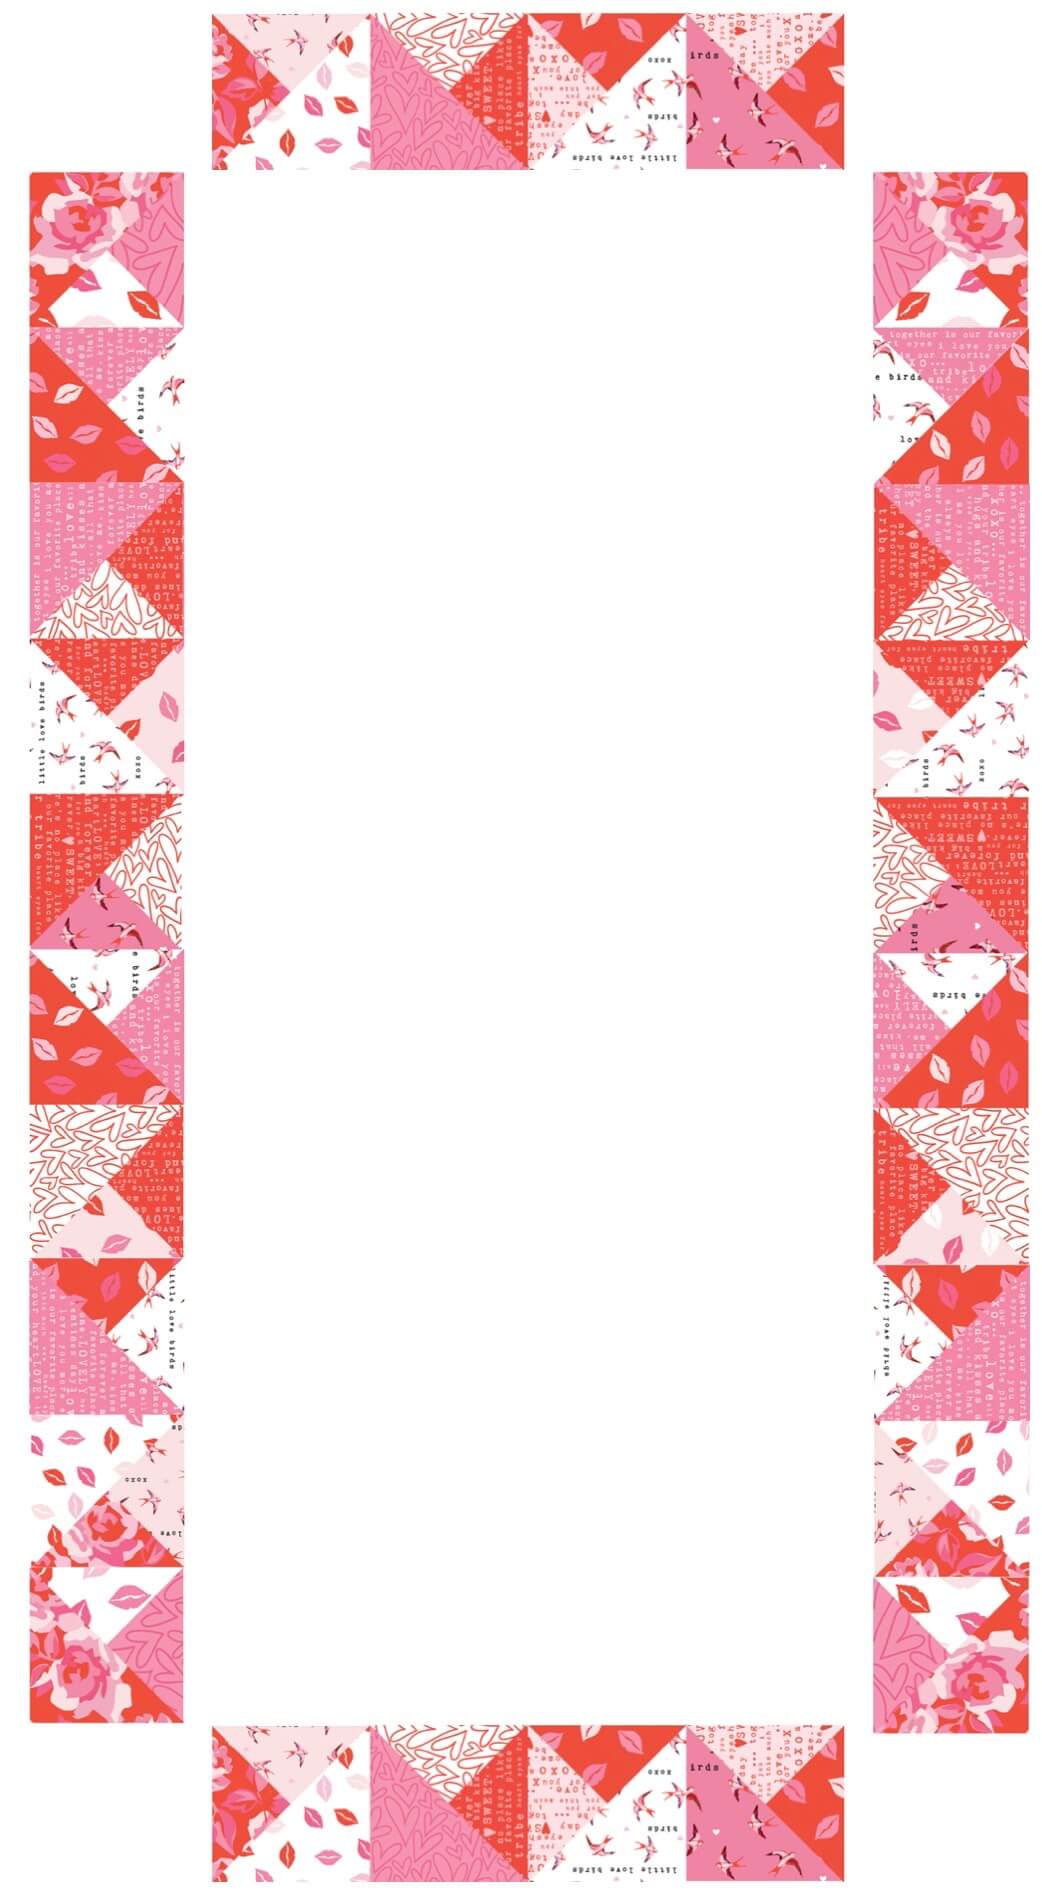 Sew A Celebration: Valentine Love Letters Modified Quarter-Square Table Runner Sewing Pattern